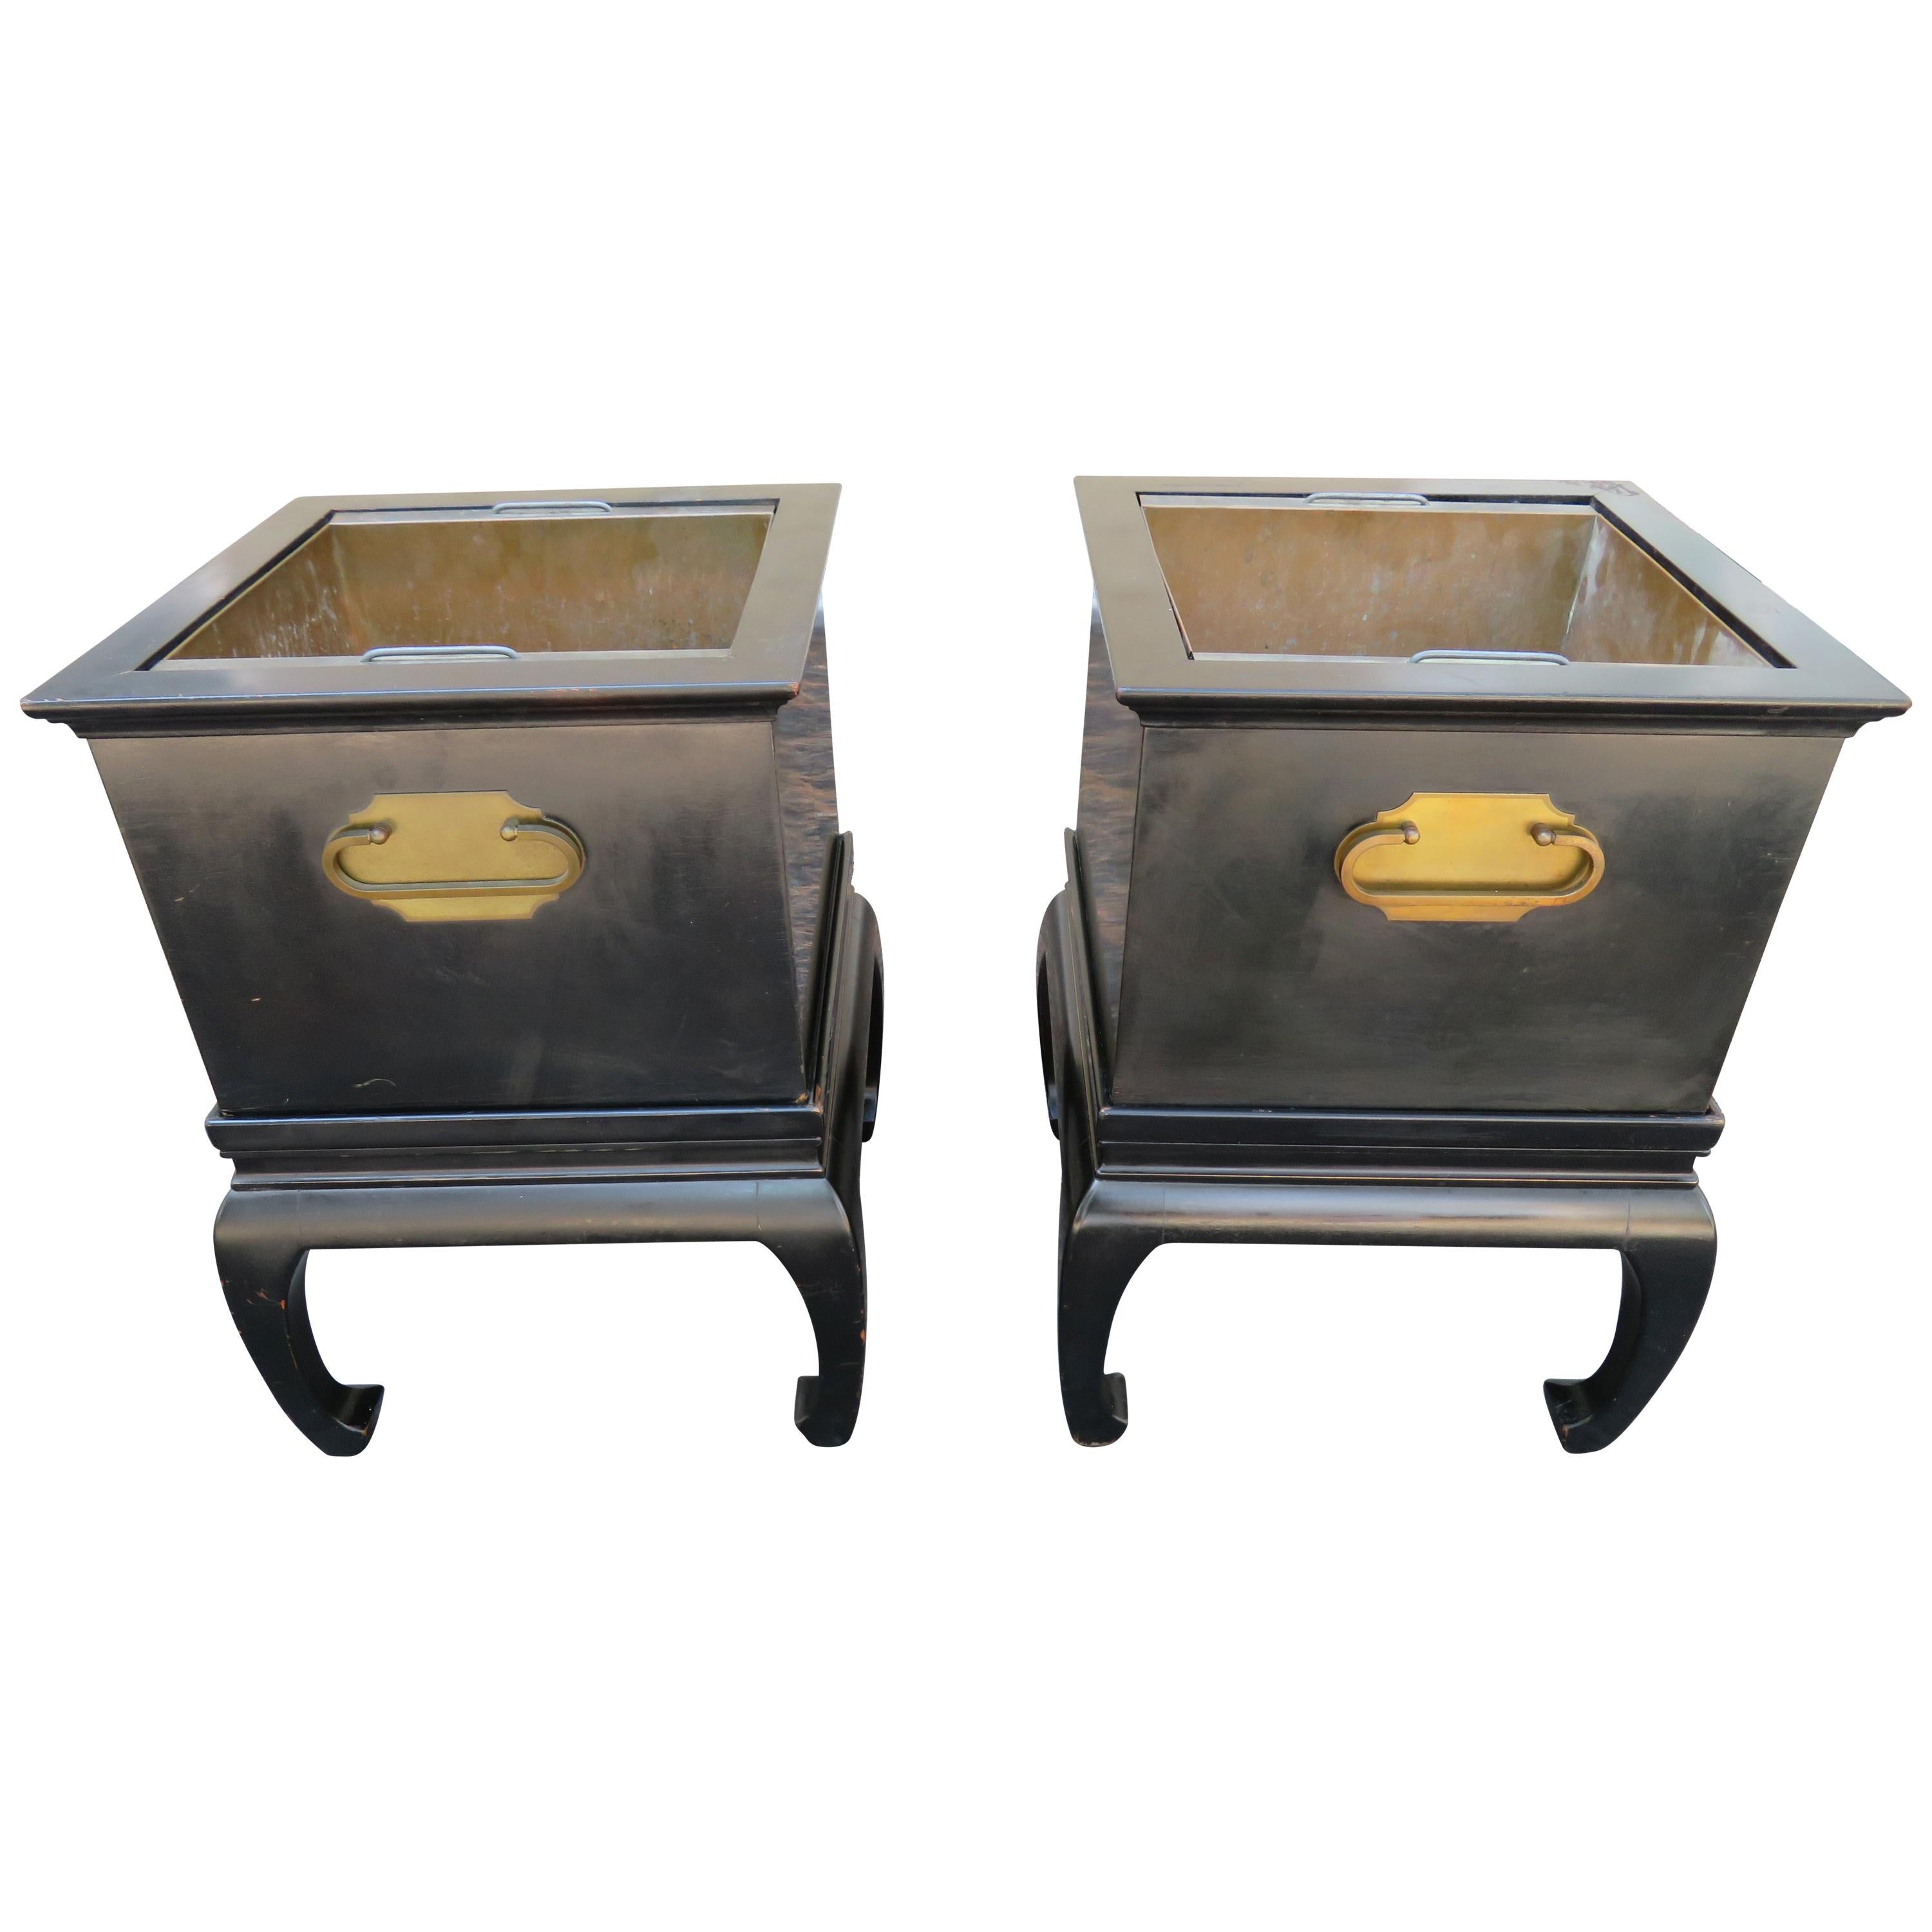 Wonderful Pair of Asian Modern Black Lacquered Planter Copper Inserts